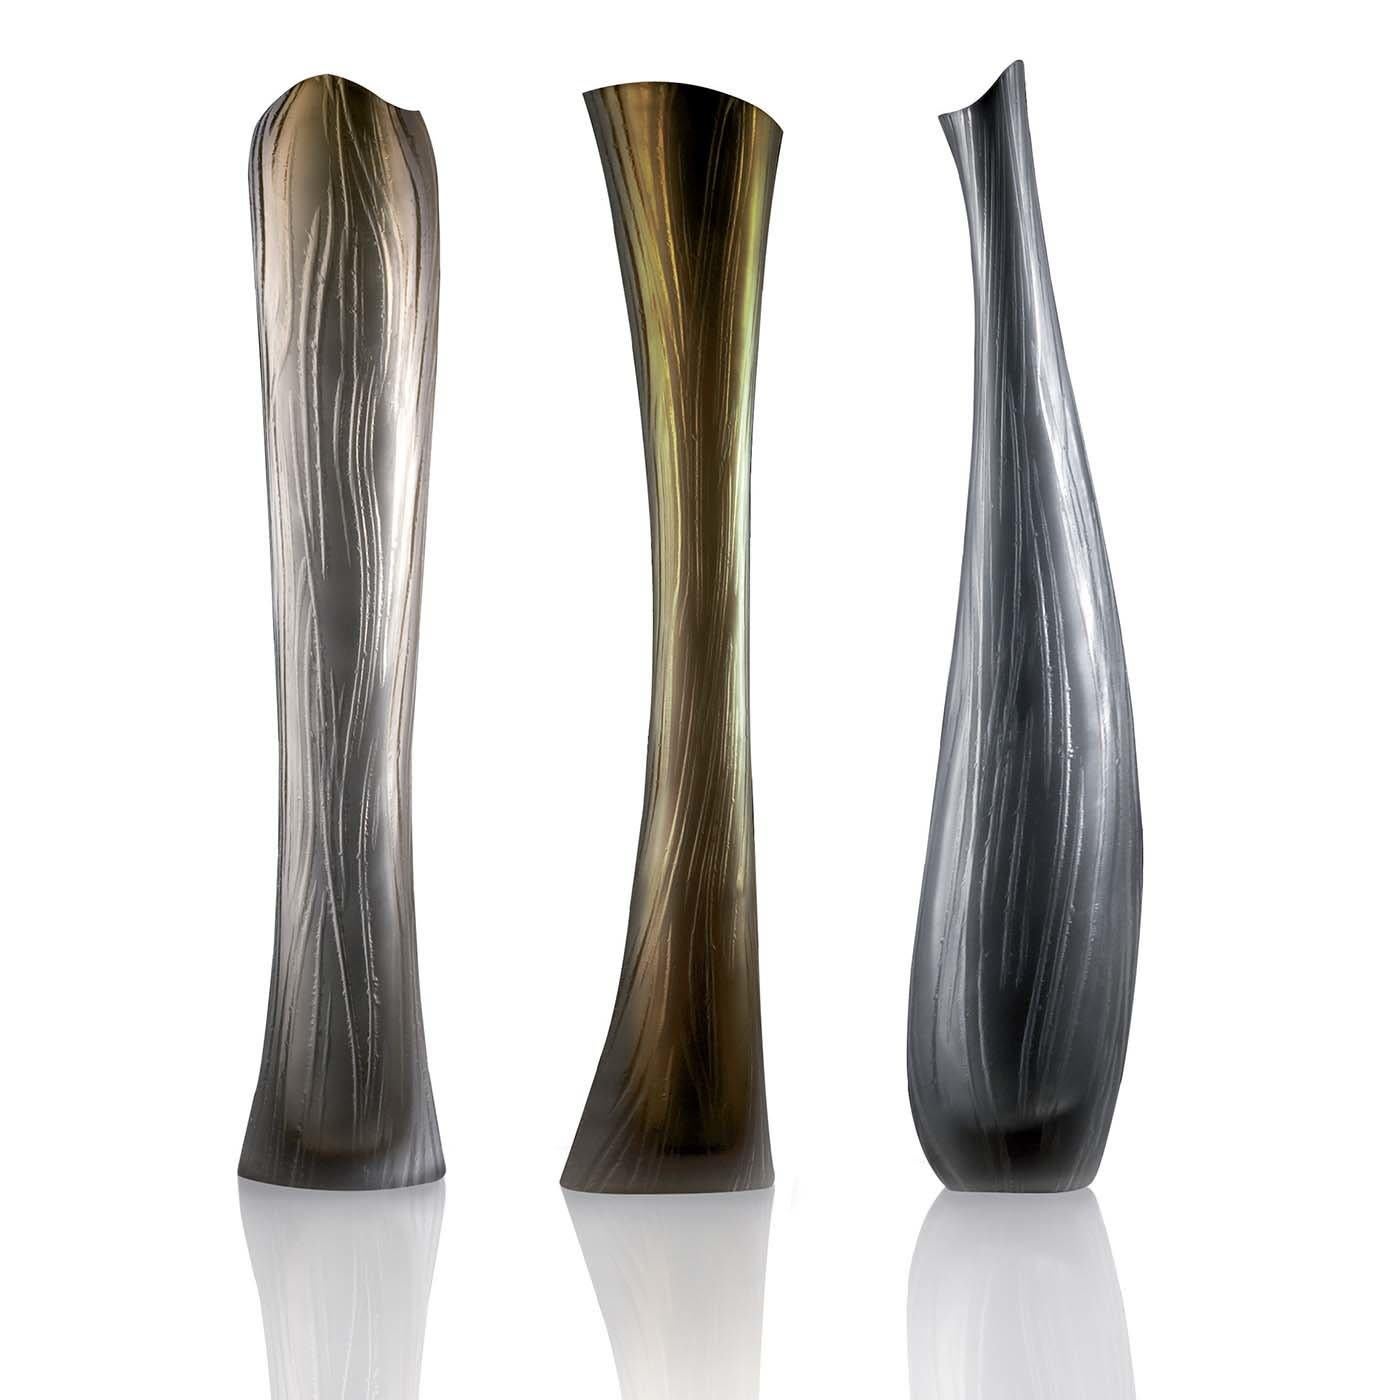 Part of the Sfumati collection of Murano glass vases, this piece was superbly crafted by master glassmakers decorated with abstract engravings carried out on a lathe. The wavy lines along the uniquely shaped body enhance the gradient hues of the